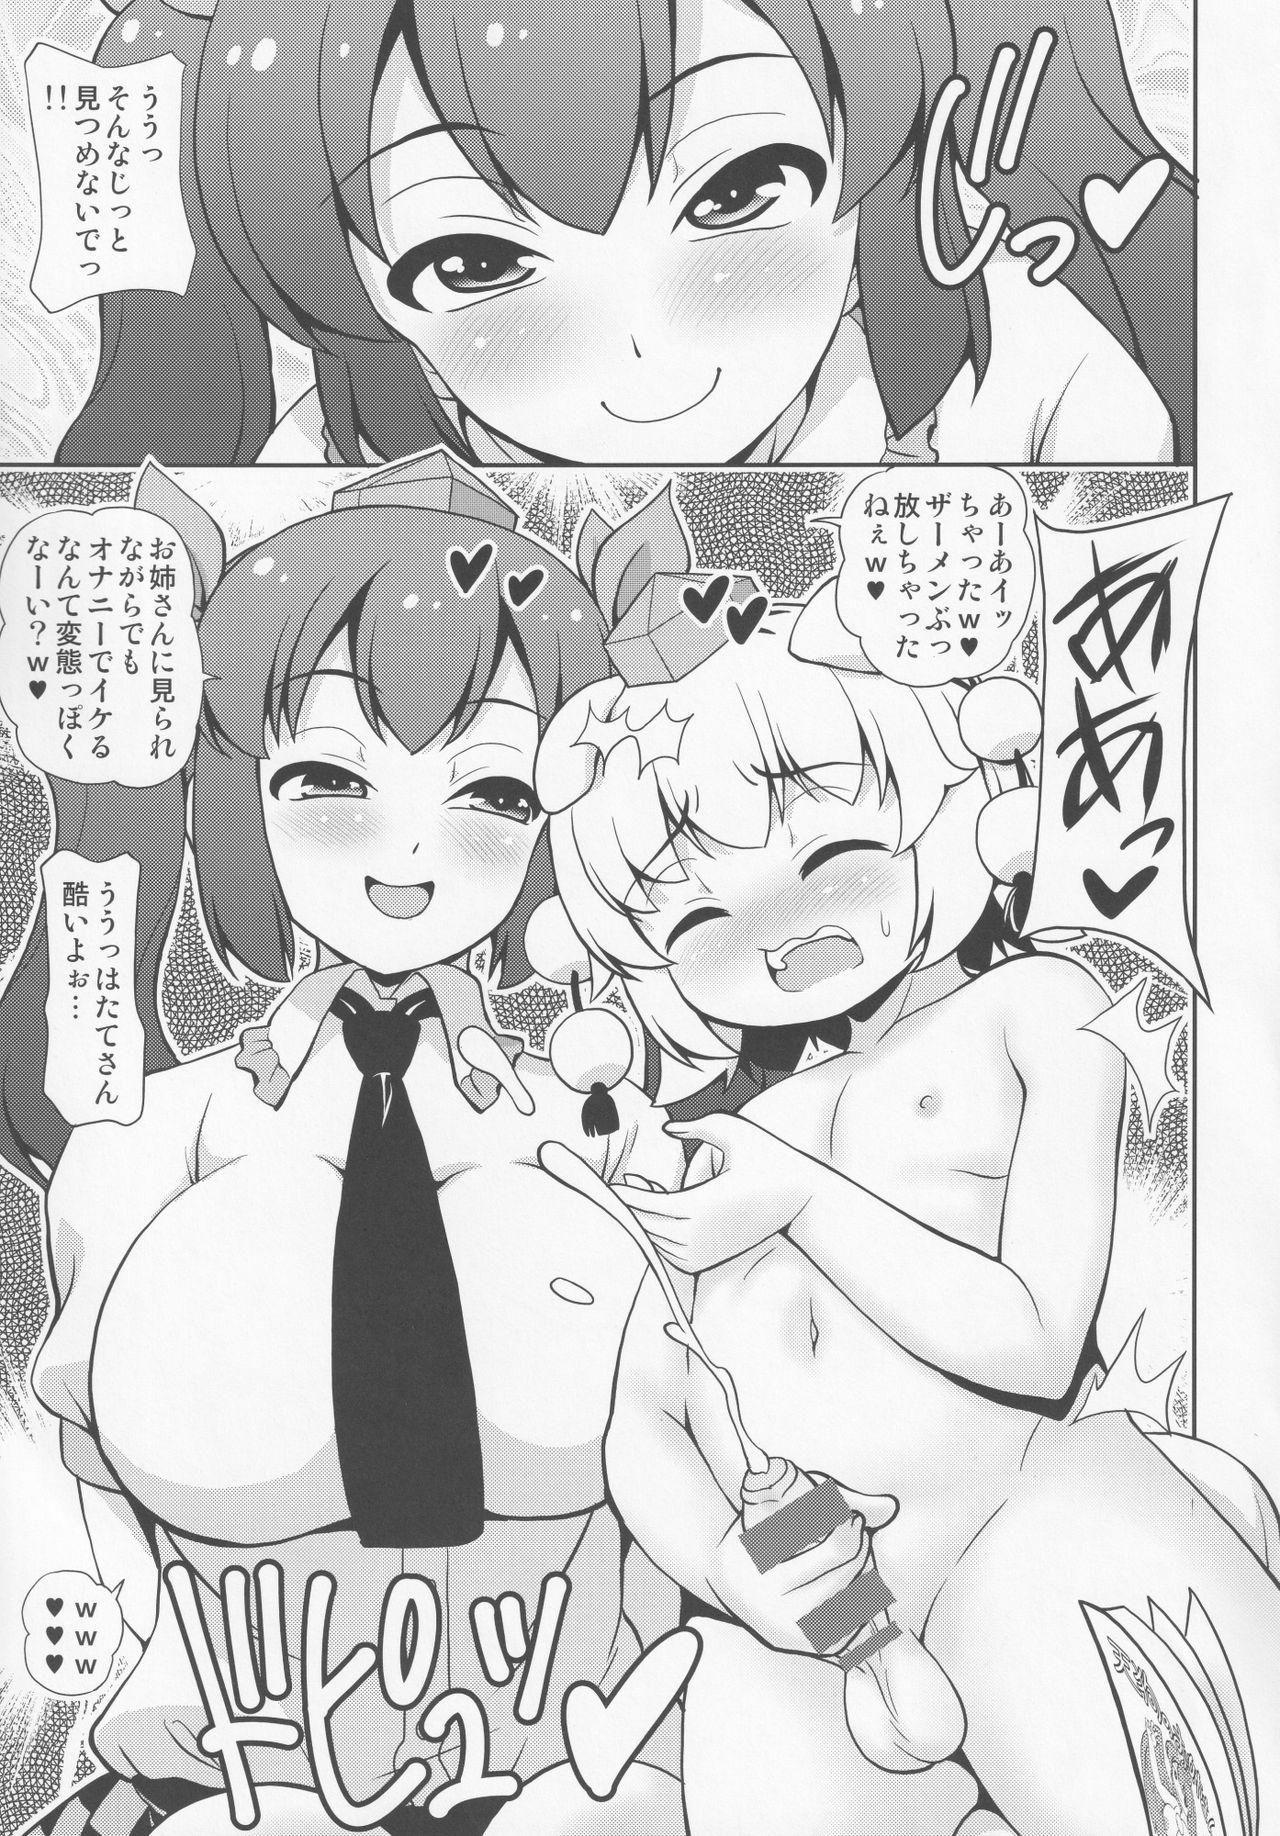 Bulge tease - Touhou project Babysitter - Page 4